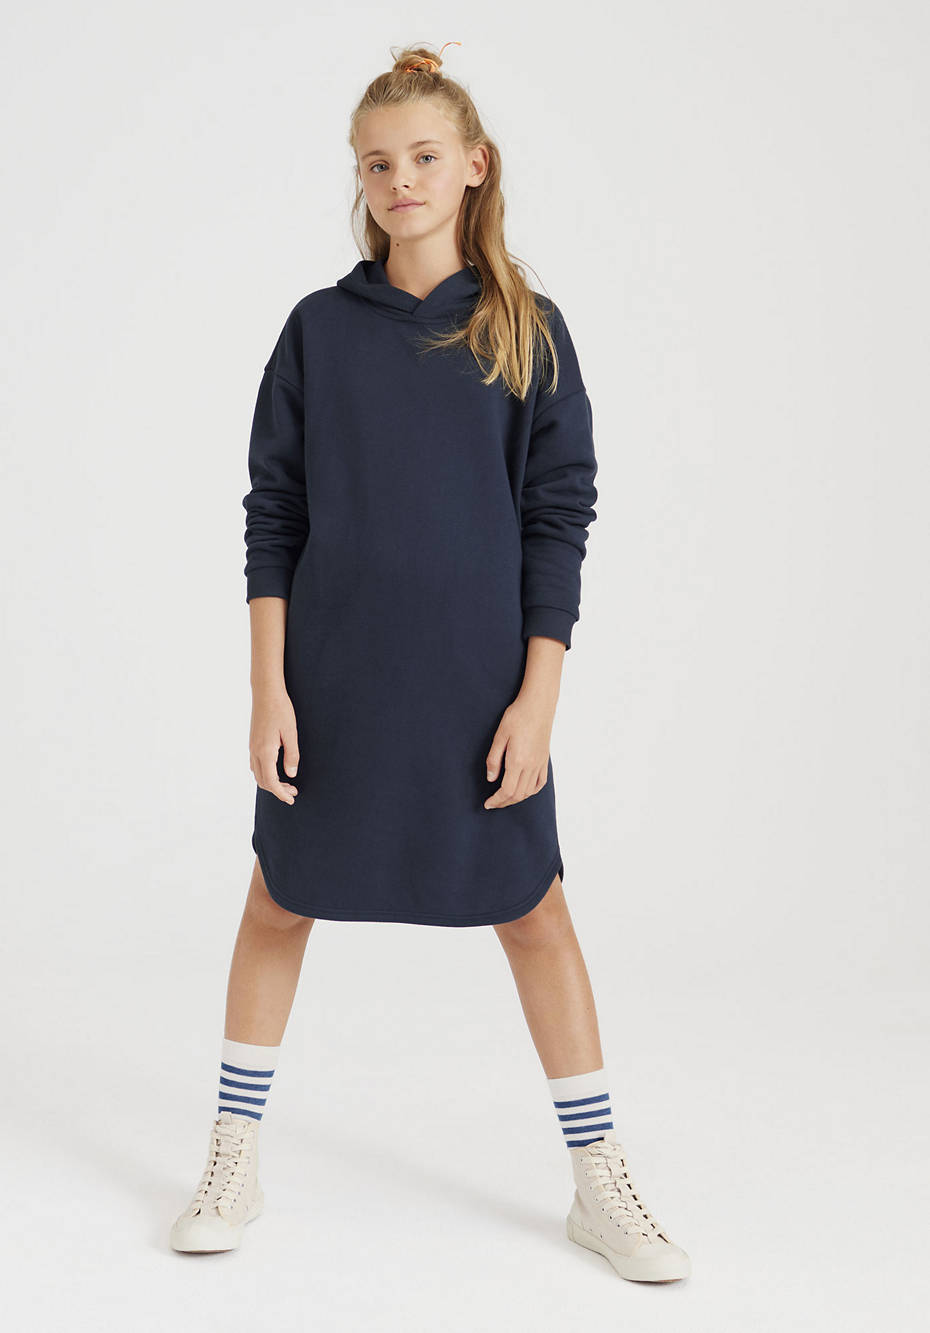 Hoodie dress made from pure organic cotton